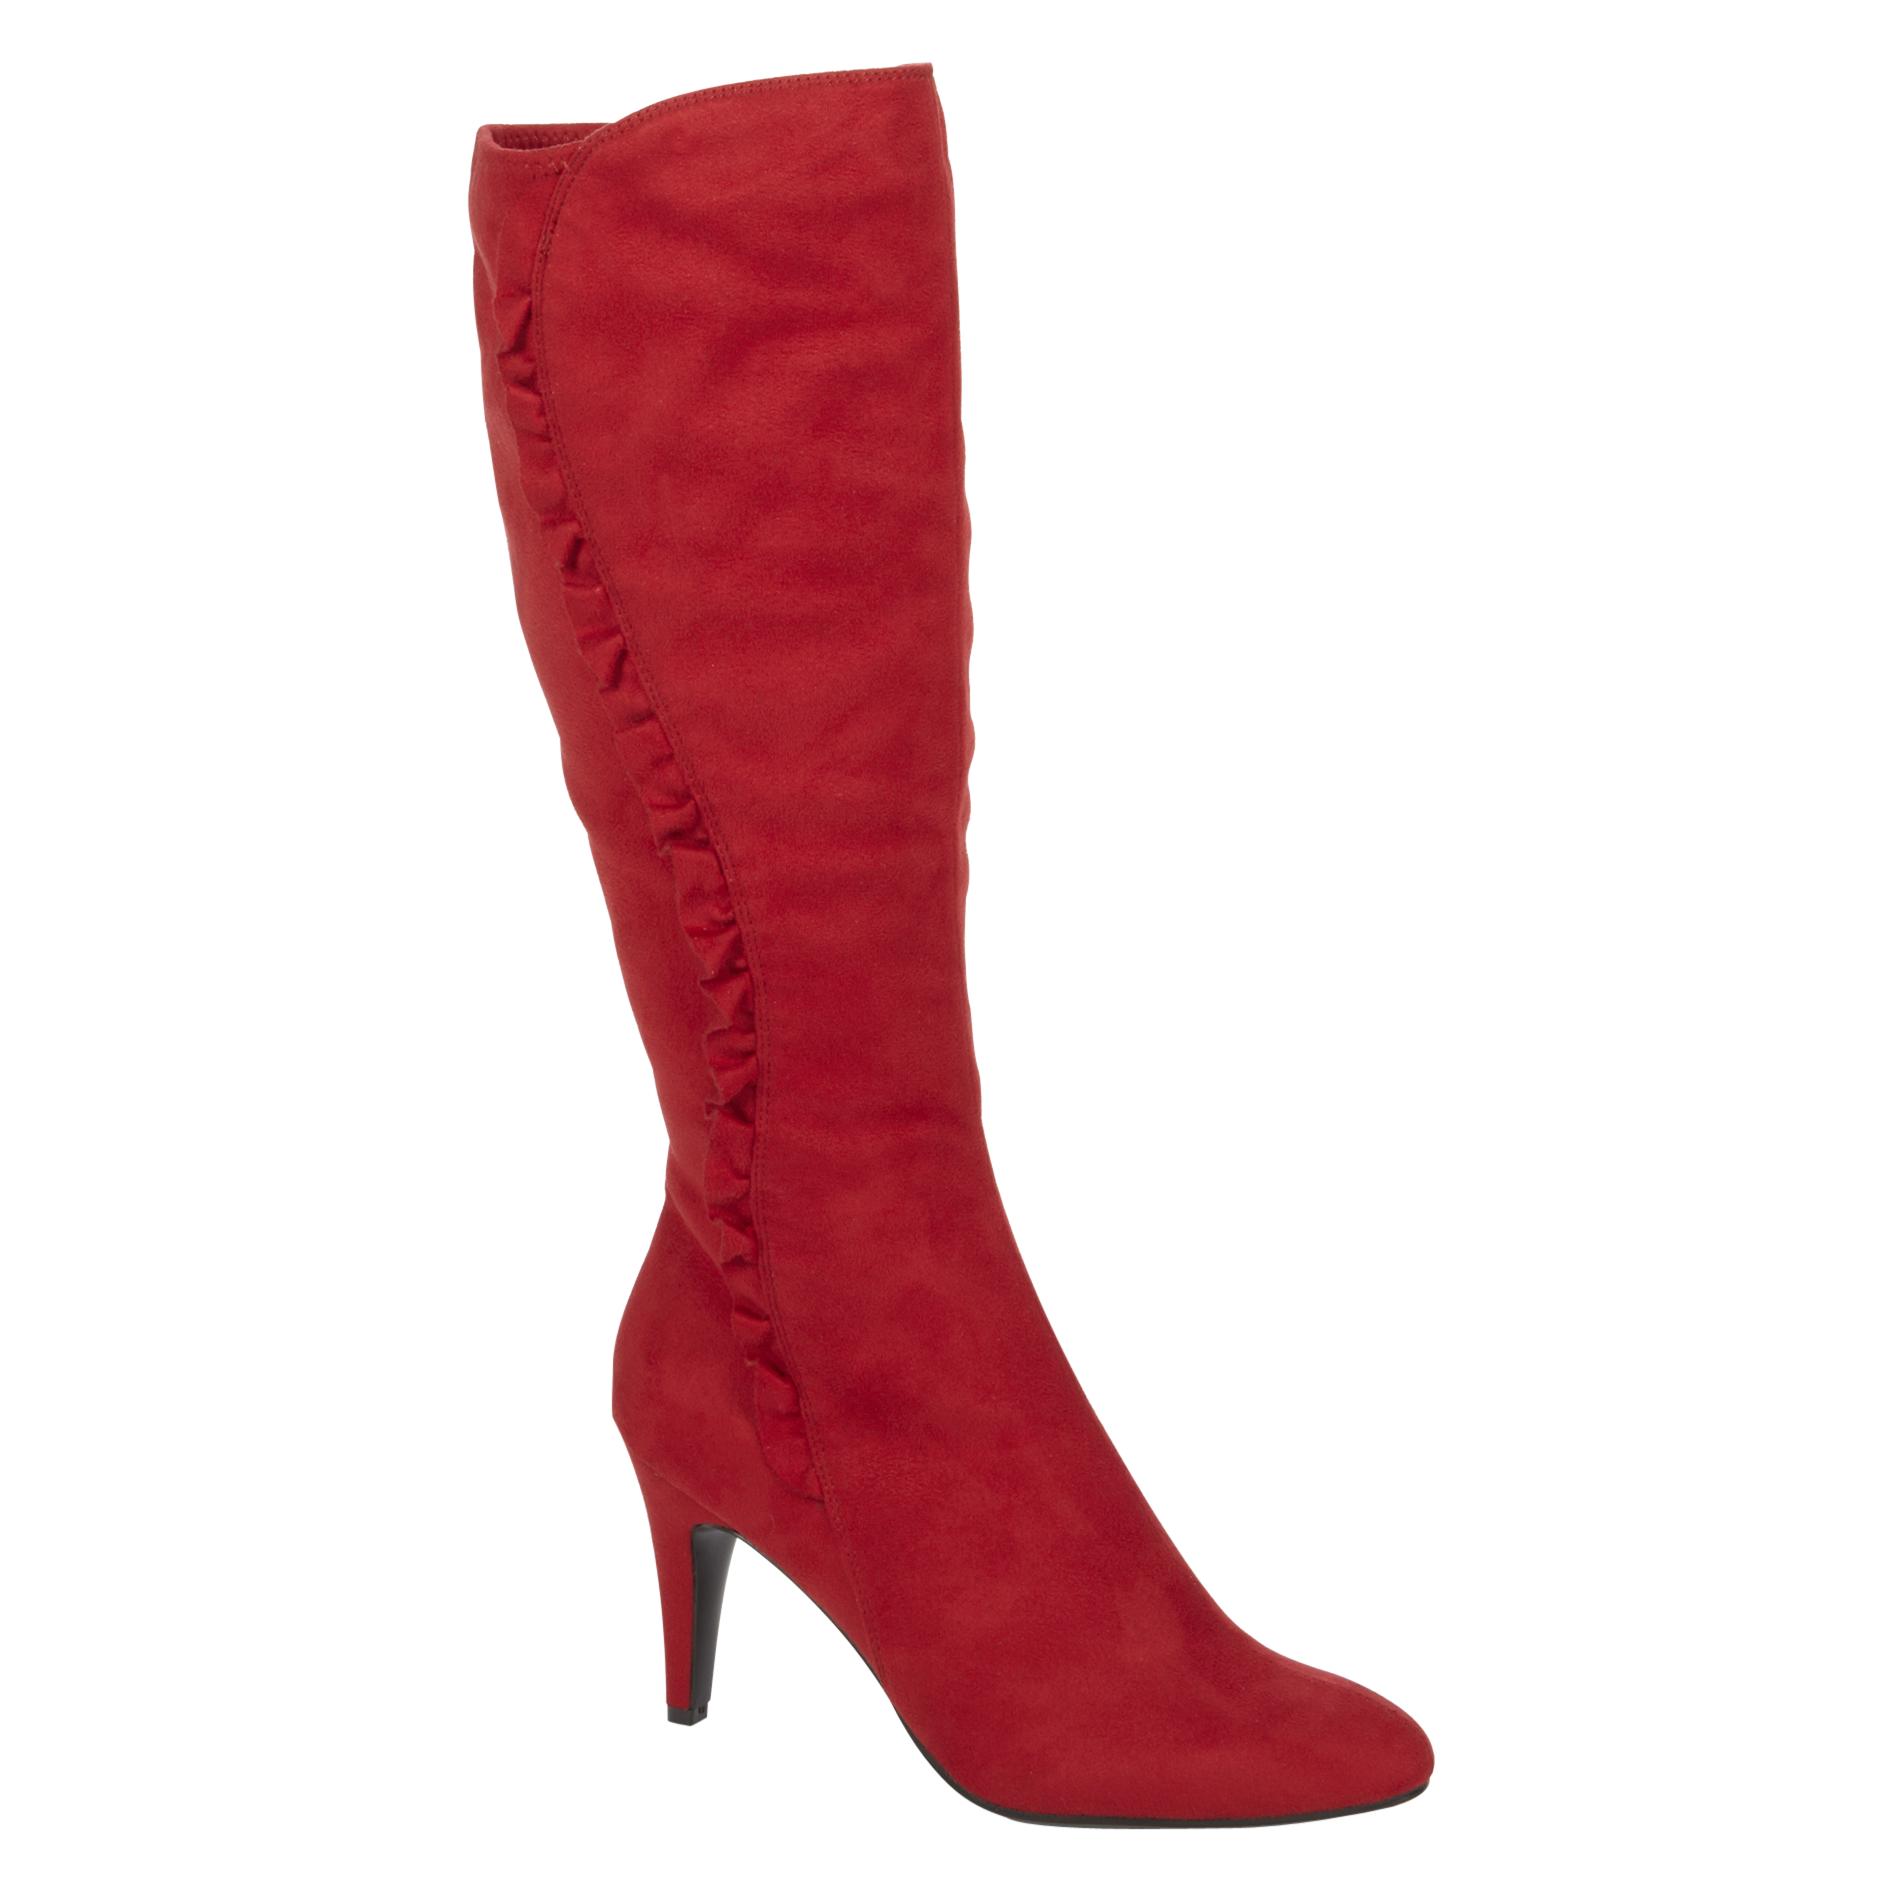 Jaclyn Smith Women's Dress Boot Flair - Red